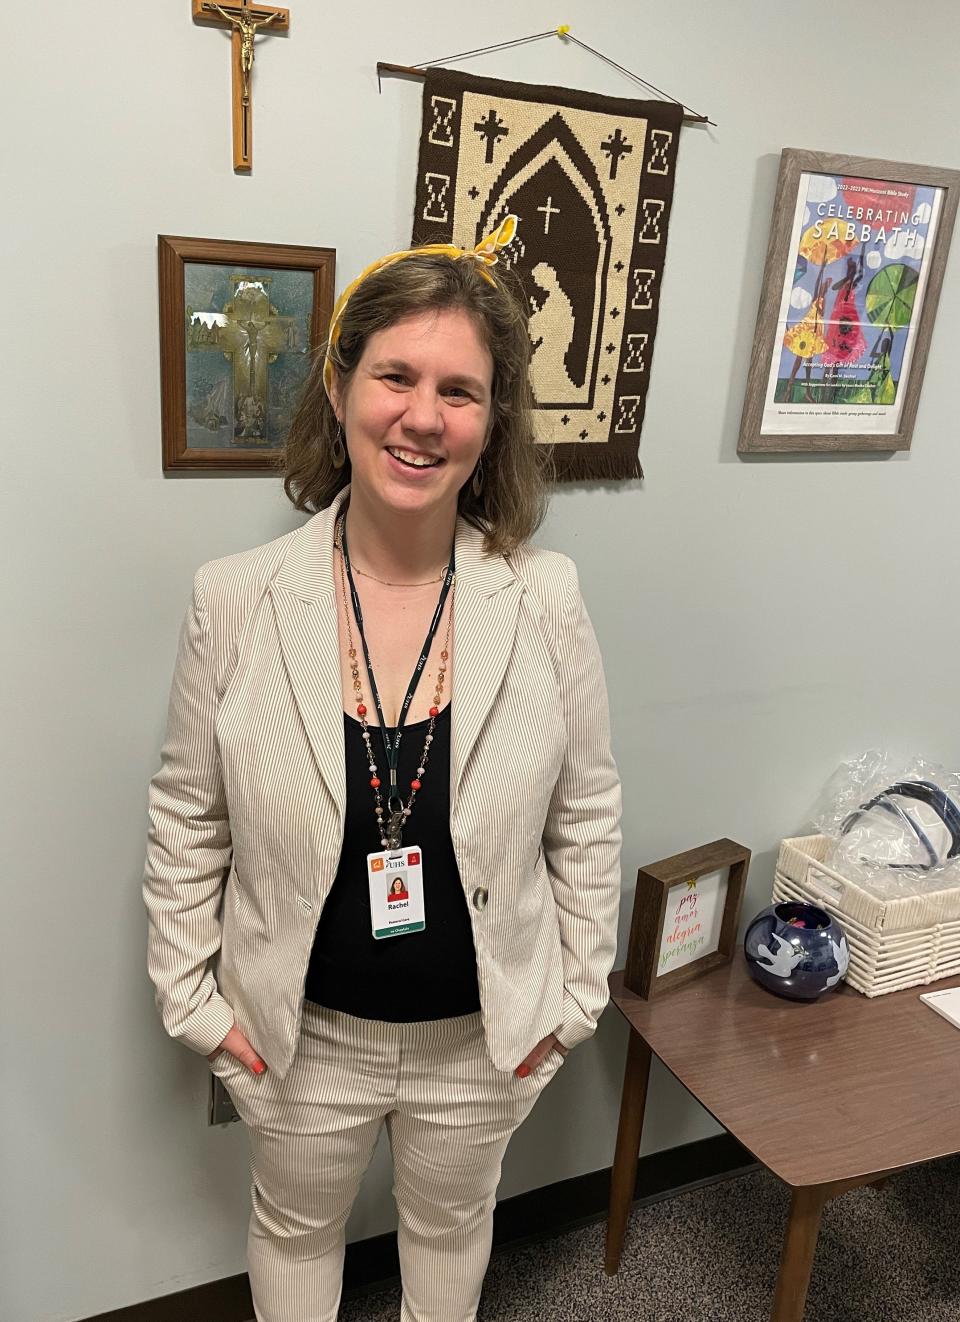 Rev. Rachel Helgeson is director of Hospital Chaplaincy through the Broome County Council of Churches (Lead UHS Chaplain) at Wilson Medical Center and Binghamton General Hospital.